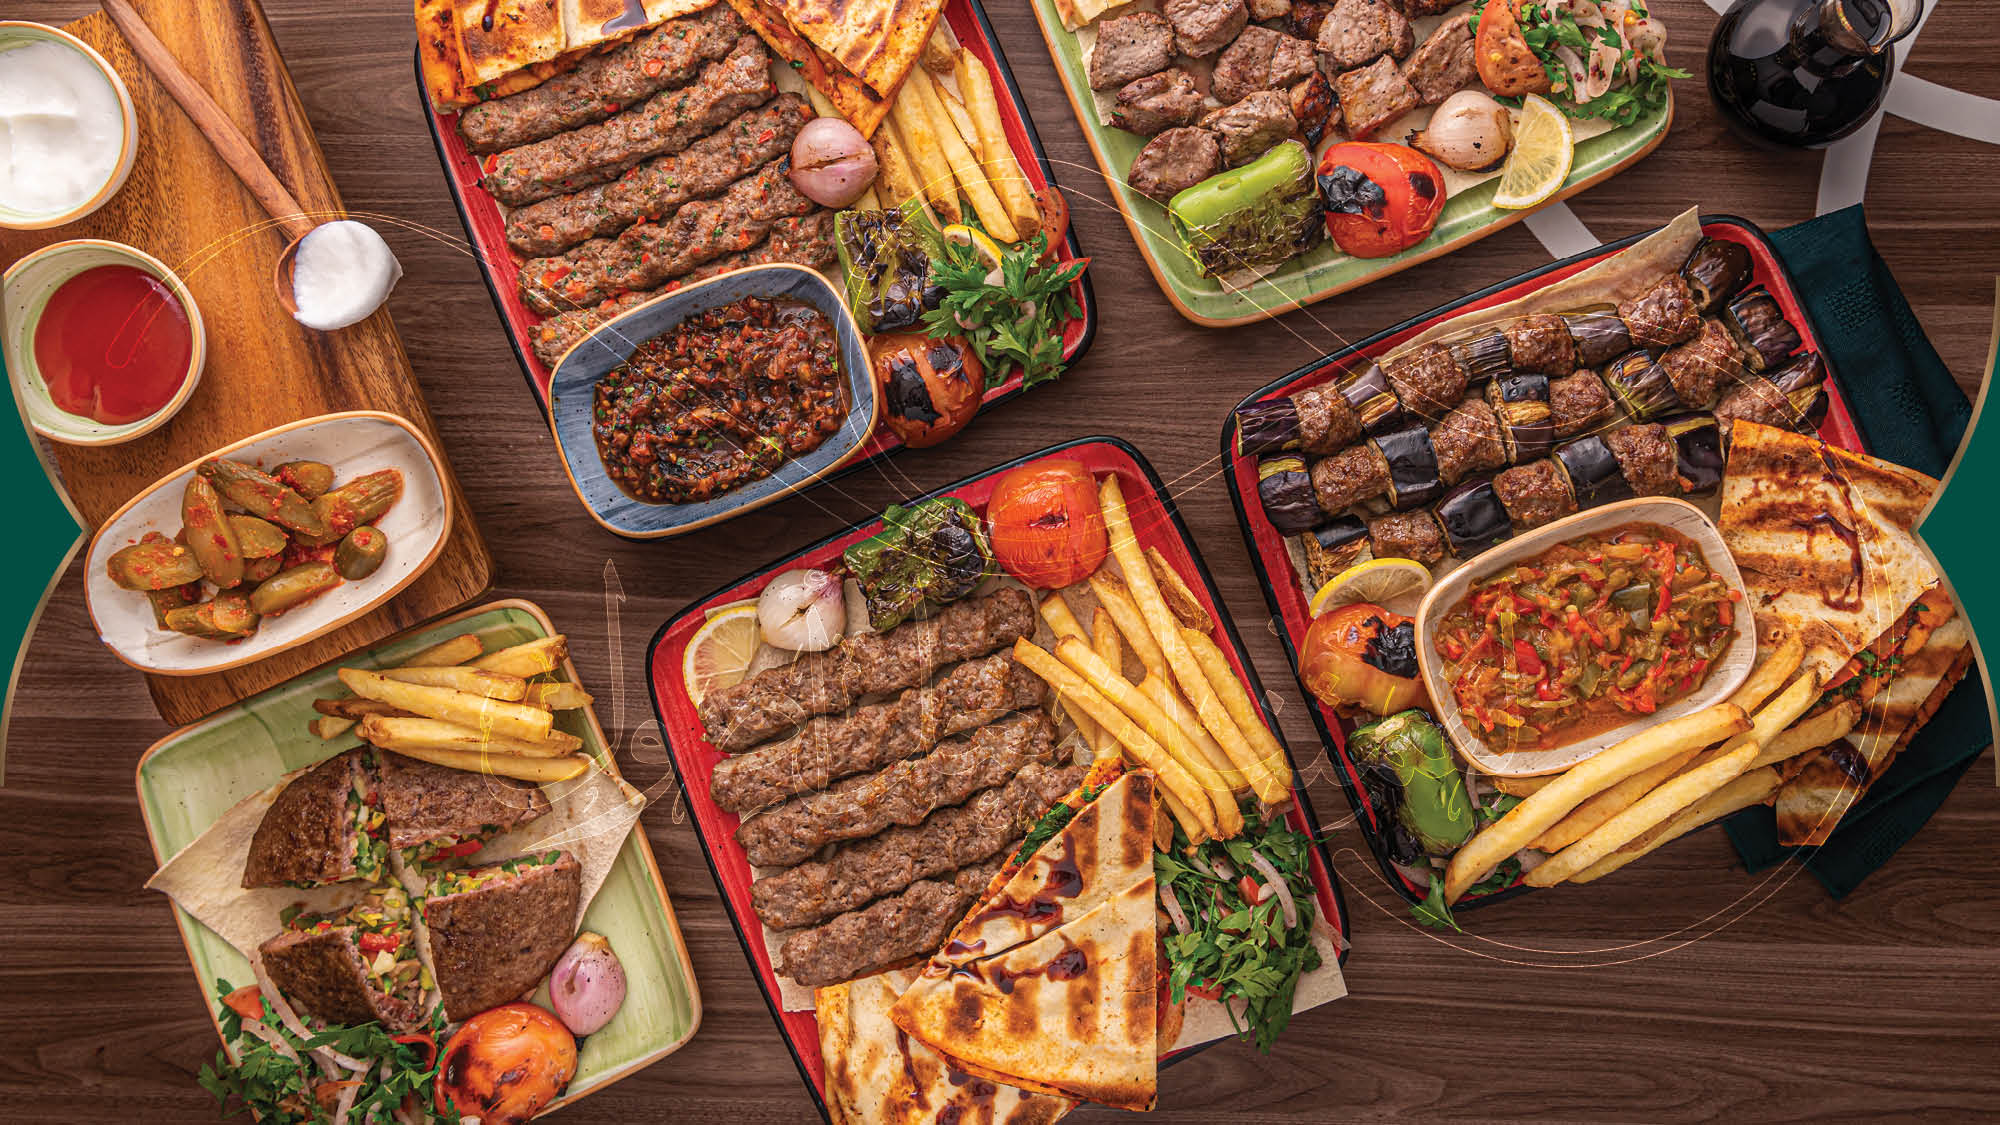 Why Are Grill and Barbecue Dishes So Popular in the UAE?